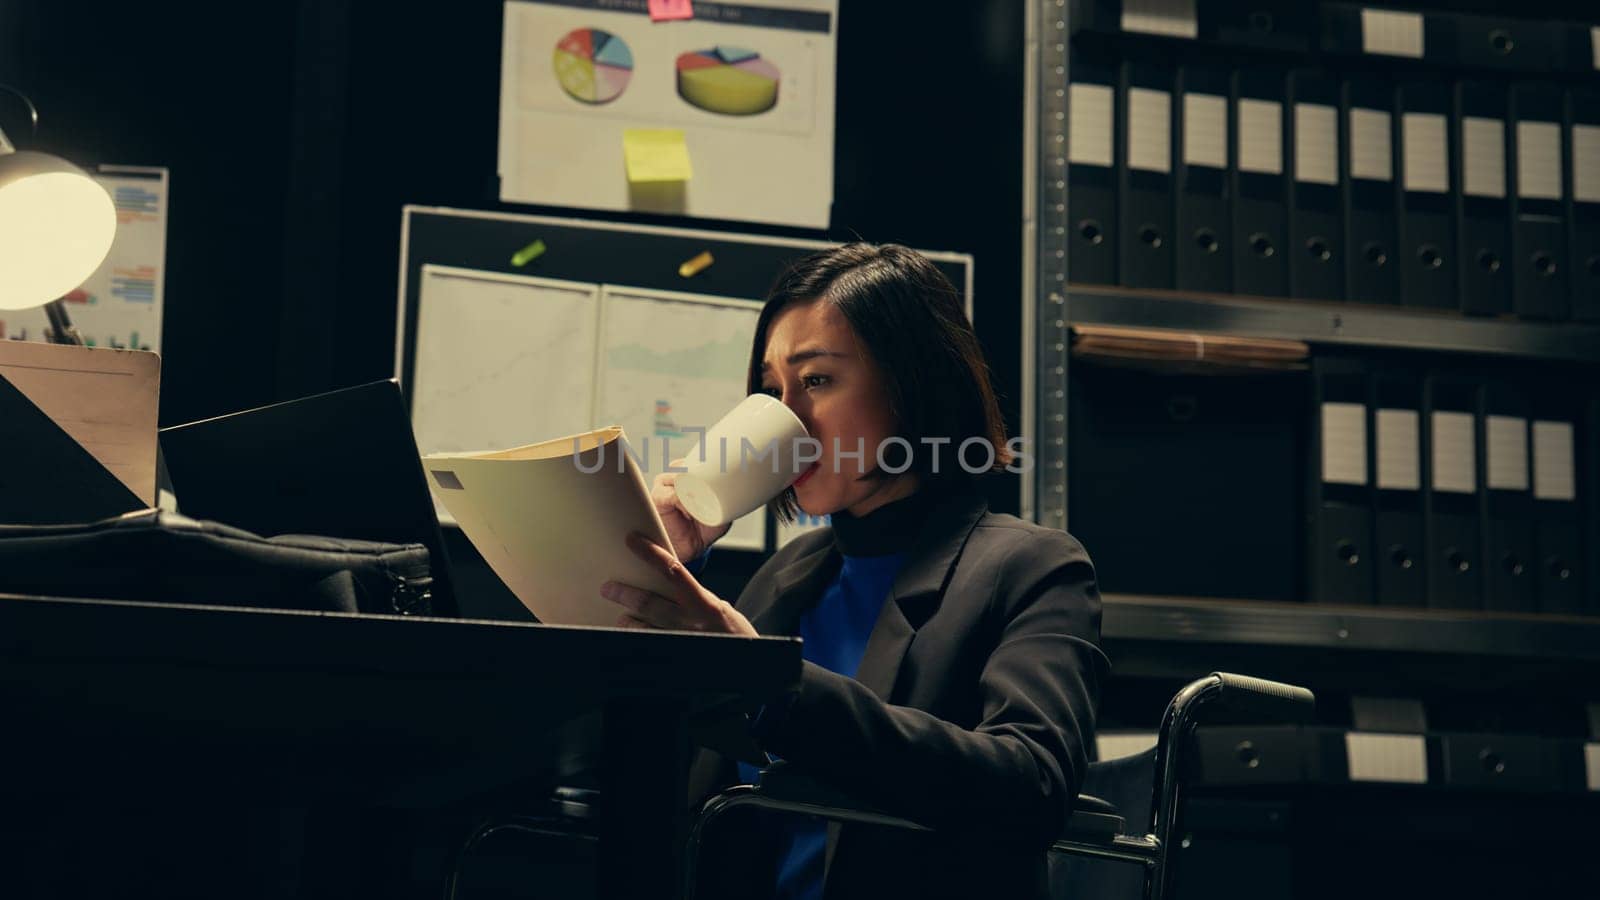 Private agent studying criminal files and archived folders in incident room by DCStudio